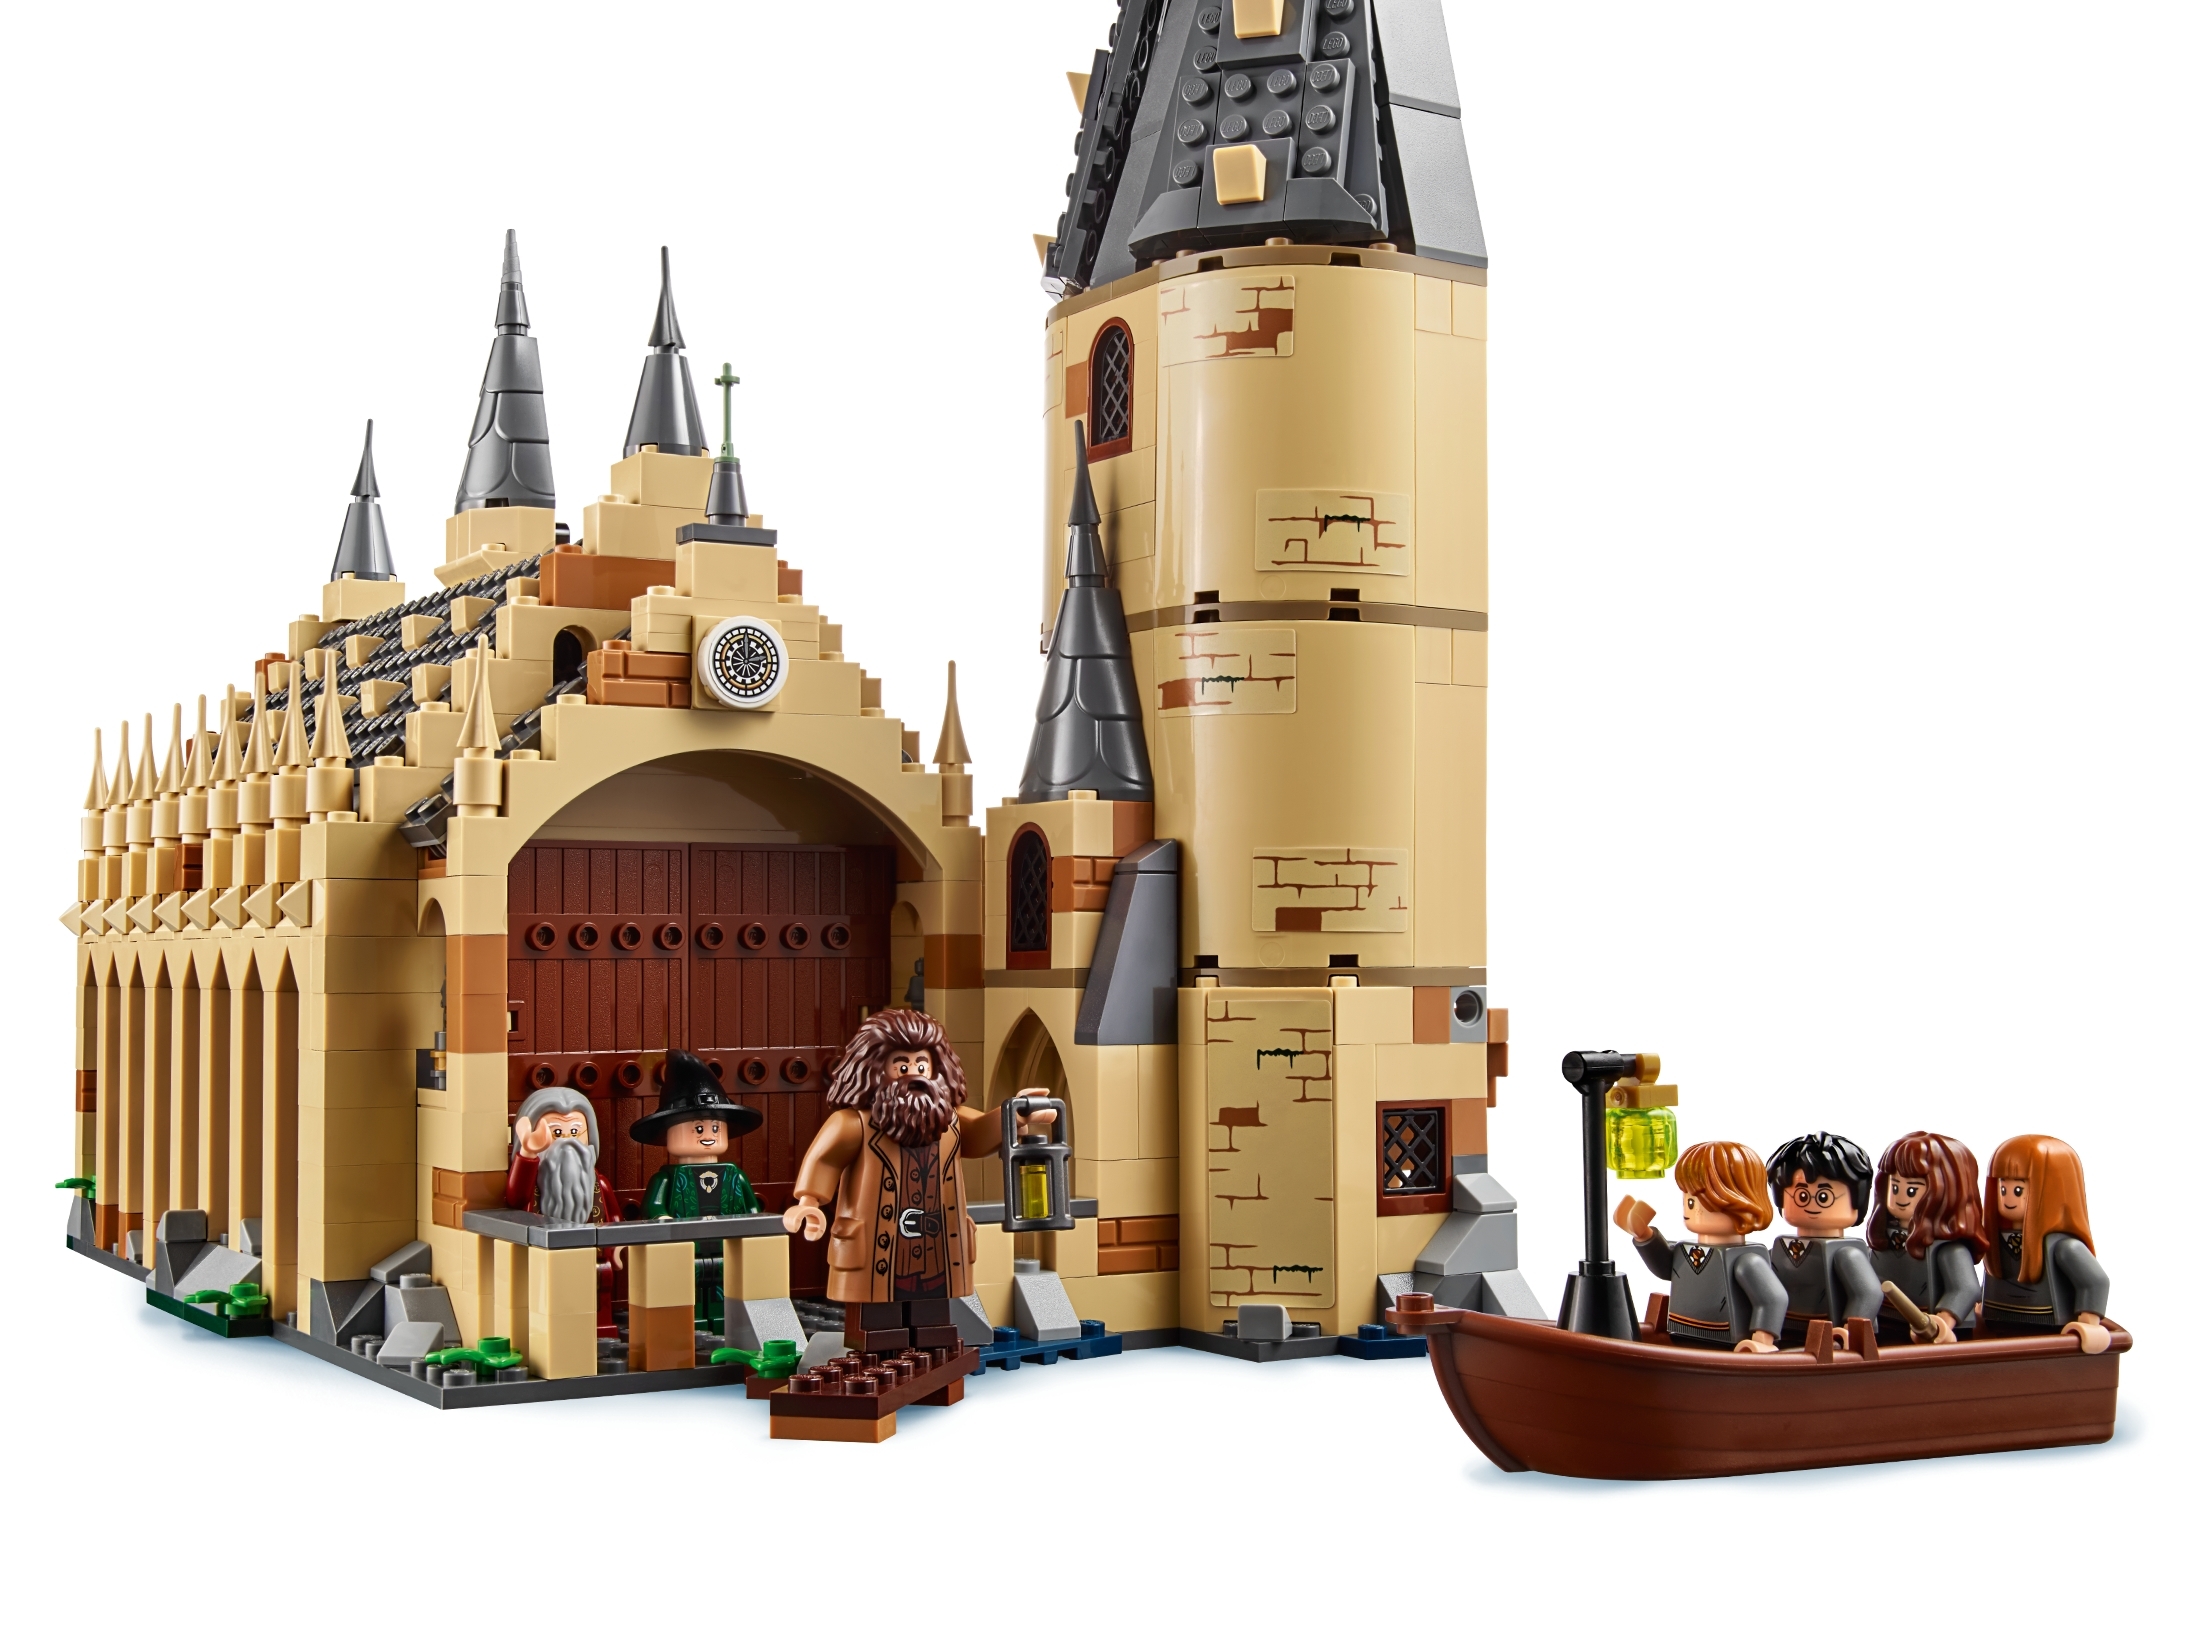 Lego ® Harry PotterSORTlNG HAT FROM SET 75954New 